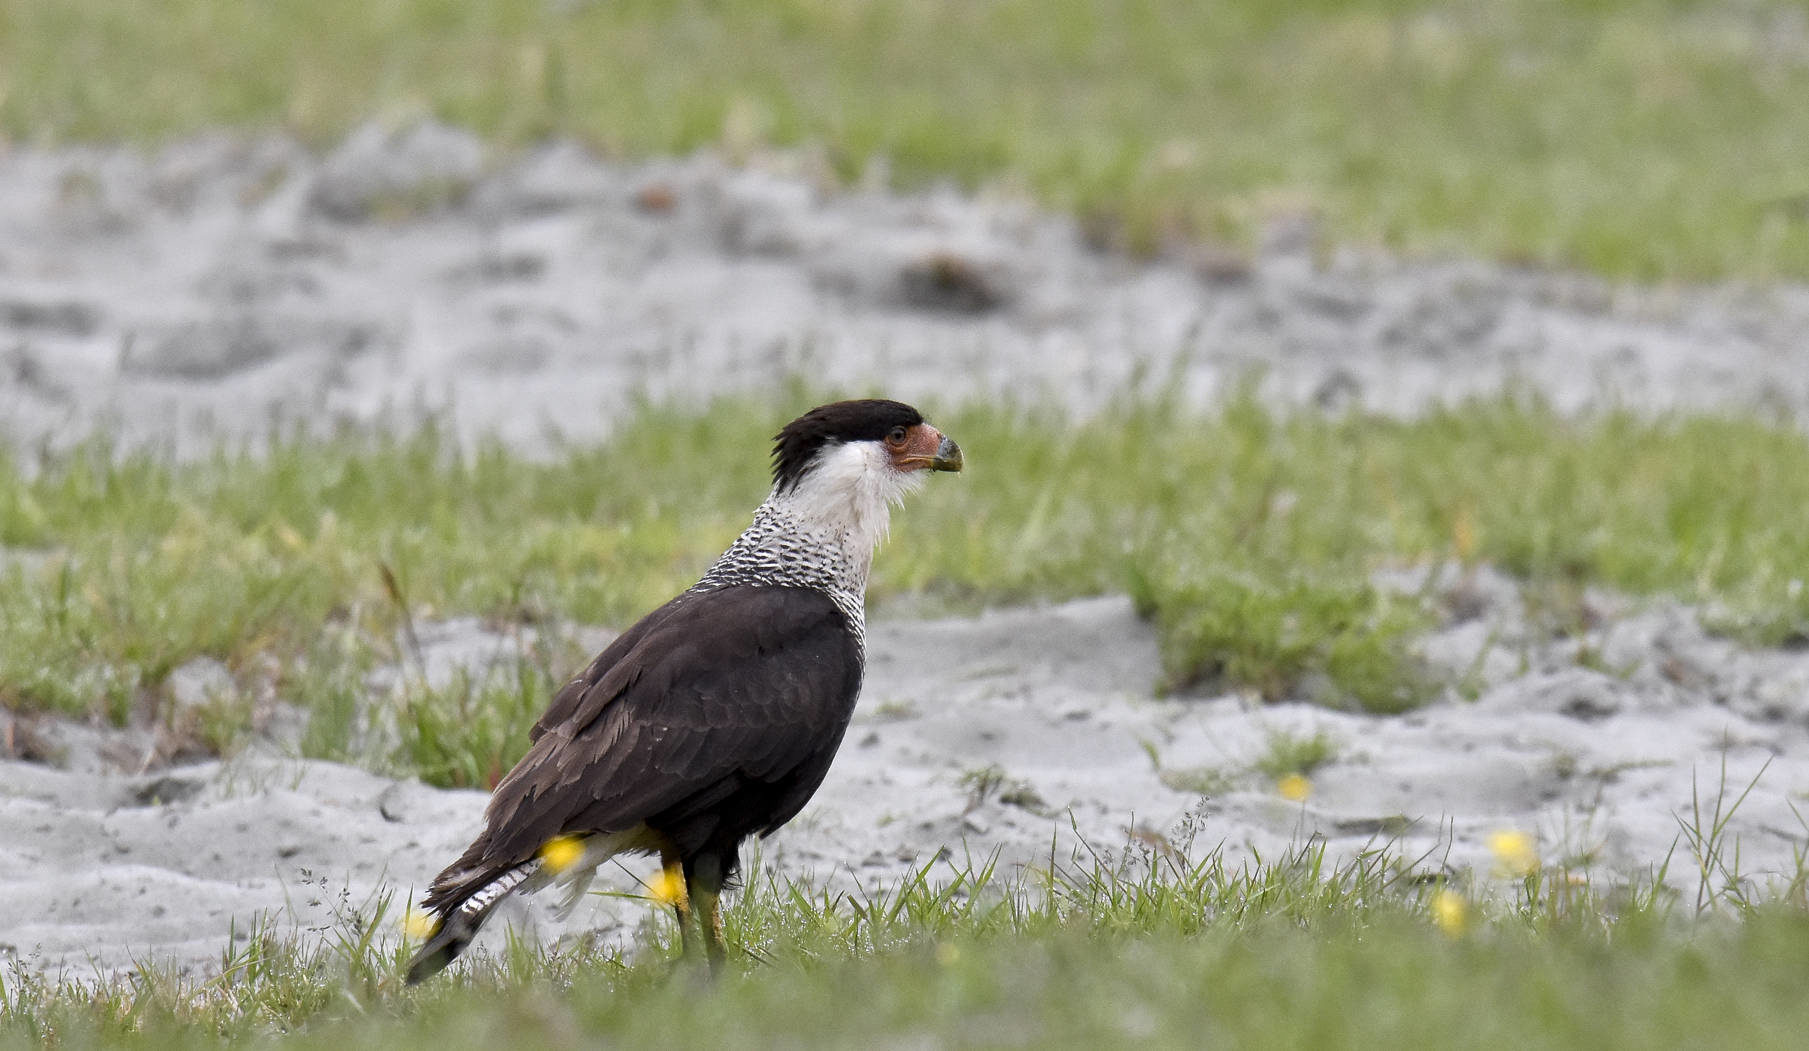 The Northern Crested Caracara was spotted many times hunting in a field up on Hammer Road